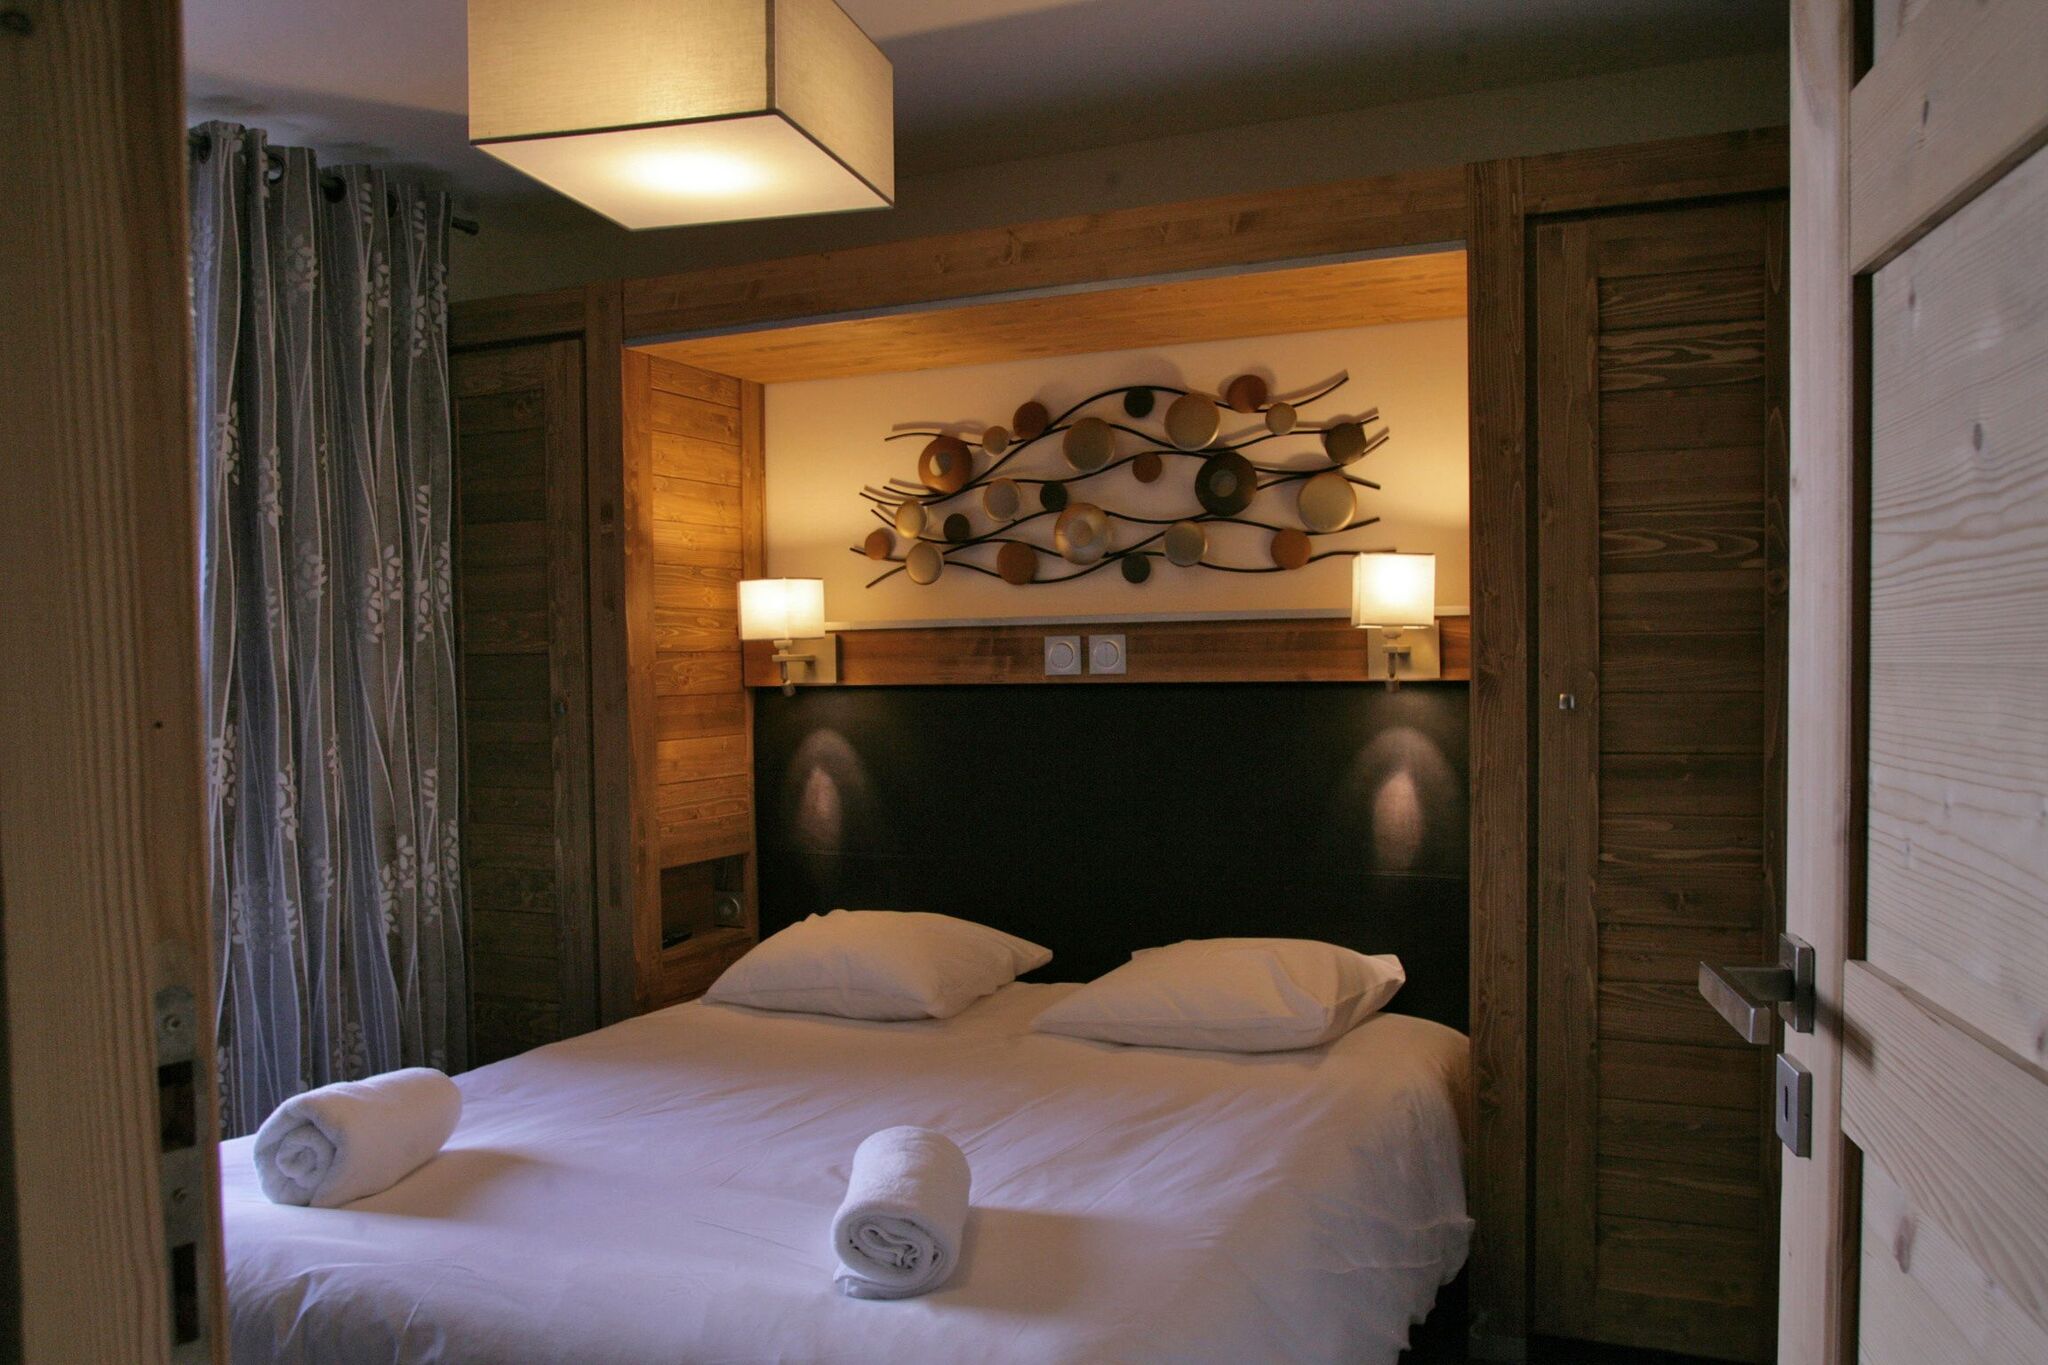 Very luxurious residence by the piste in winter sports paradise Val Thorens